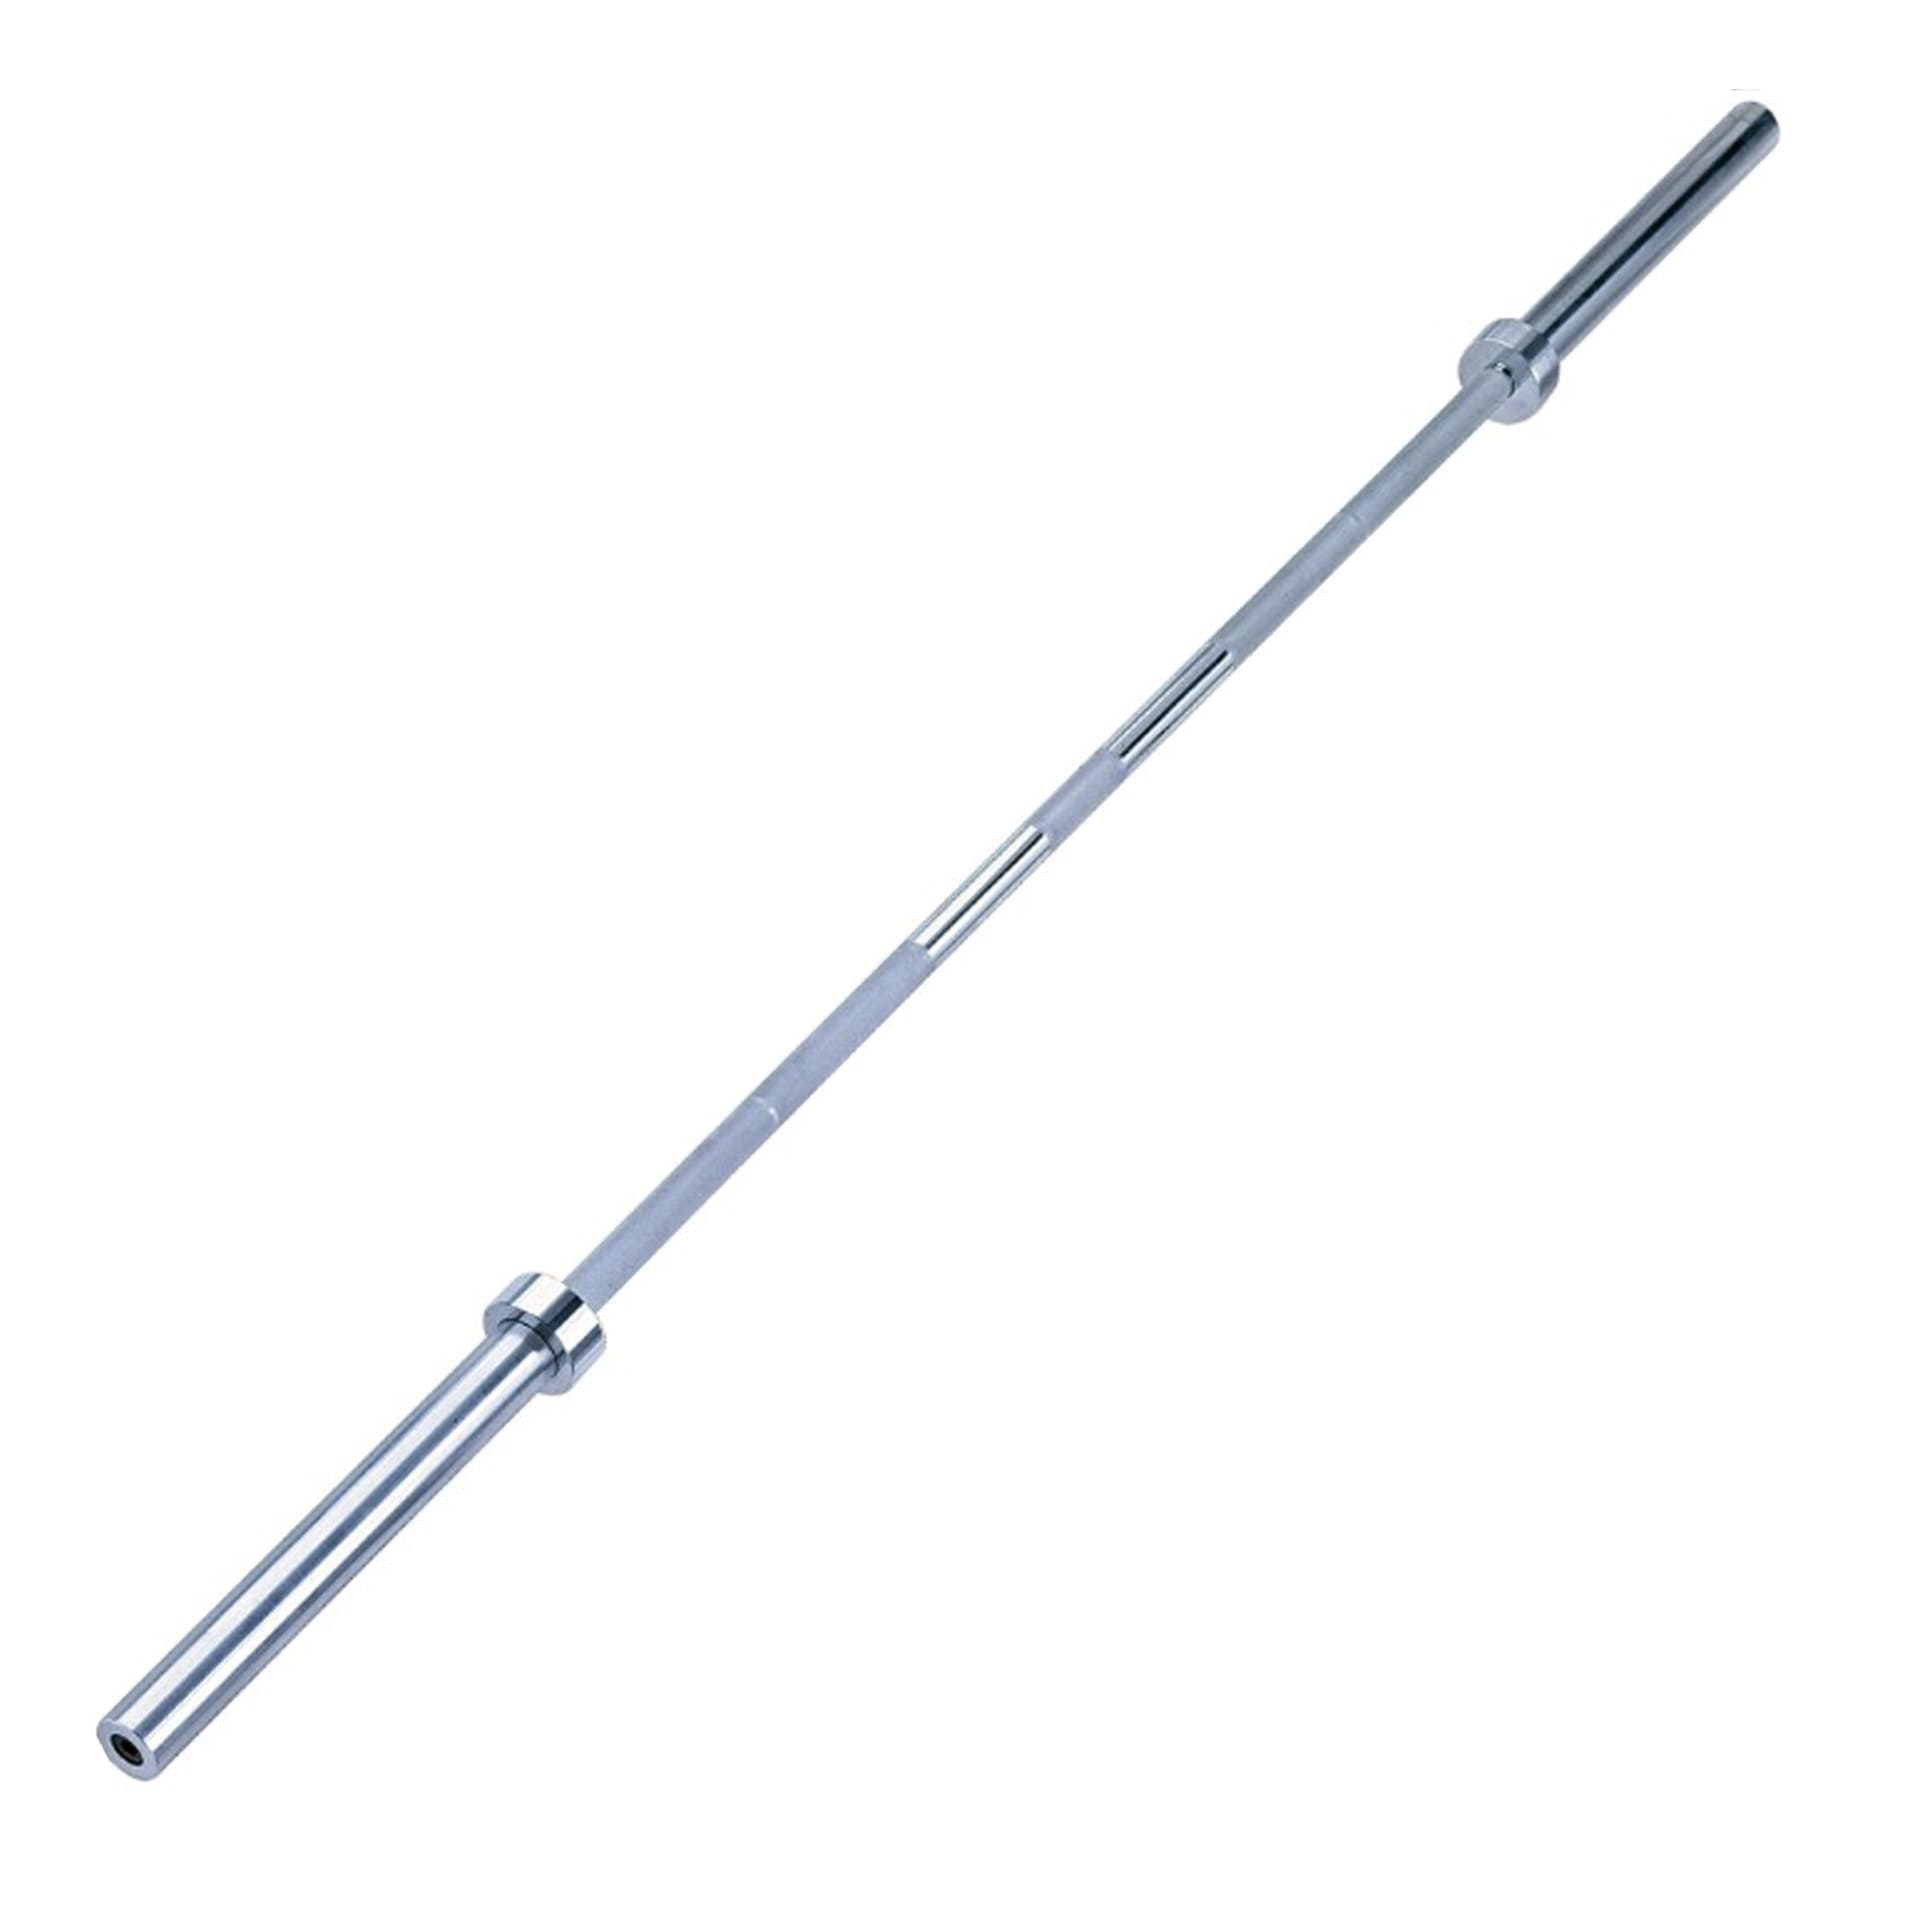 Ivanko Olympic Bar with Needle Bearing, 20 Kg, 86 Inch